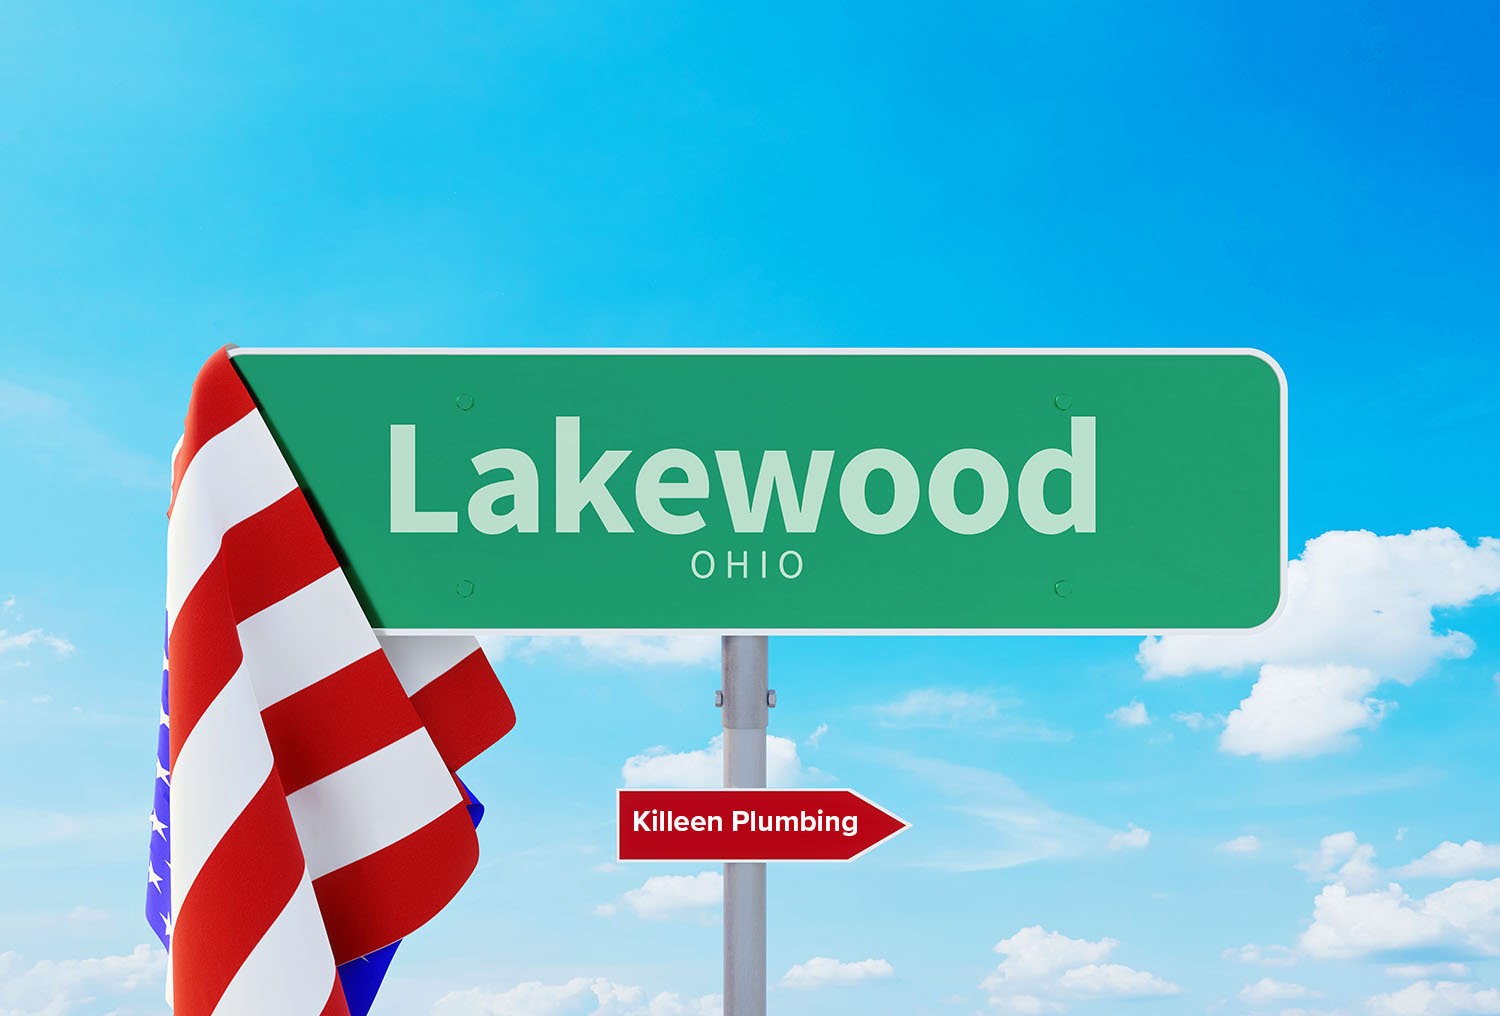 A sign in Lakewood, OH pointing to Killeen Plumbing